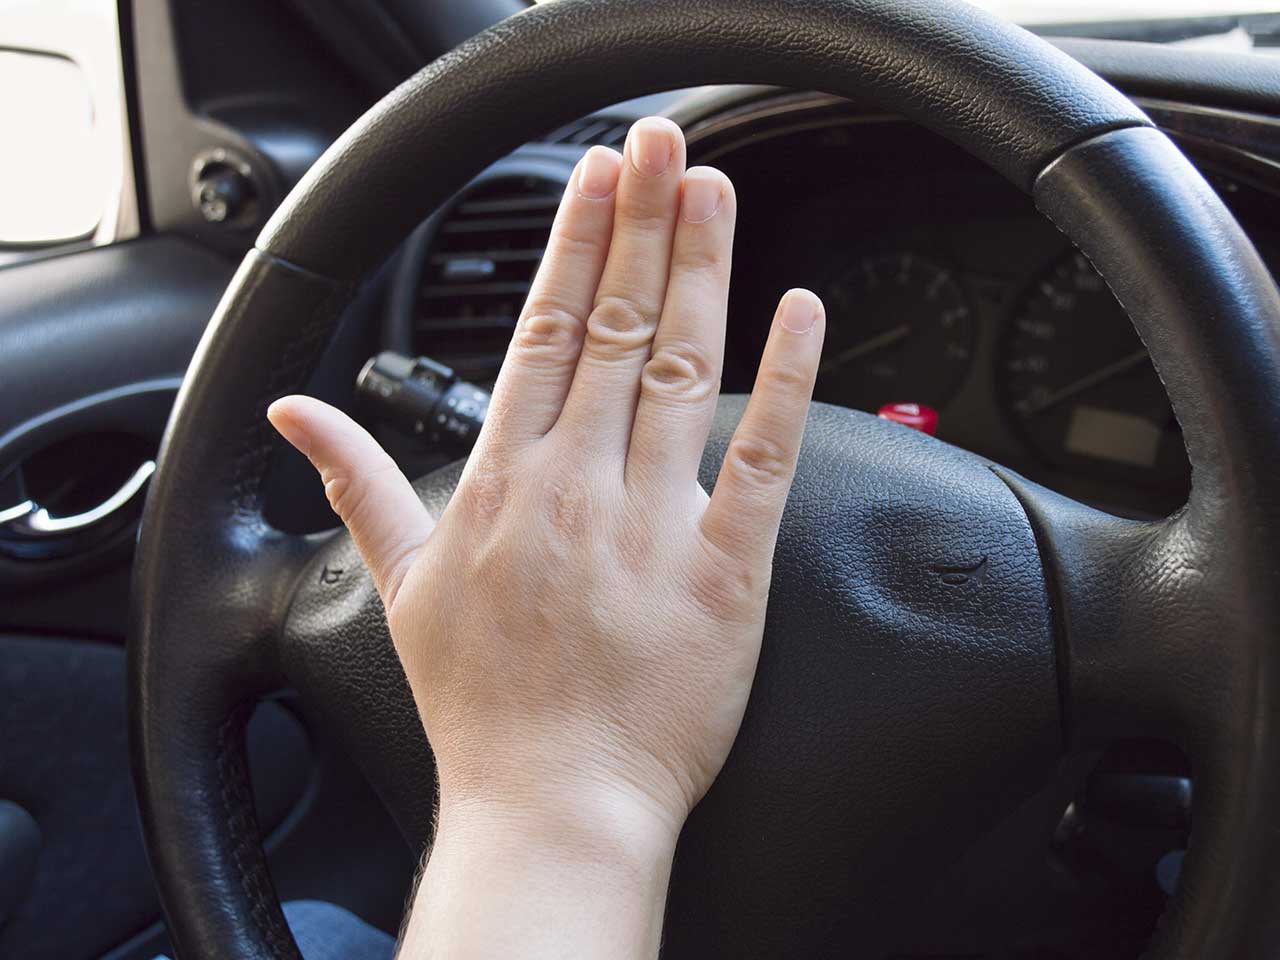 Driving slamming fist on the car horn to show frustration in an act of road rage